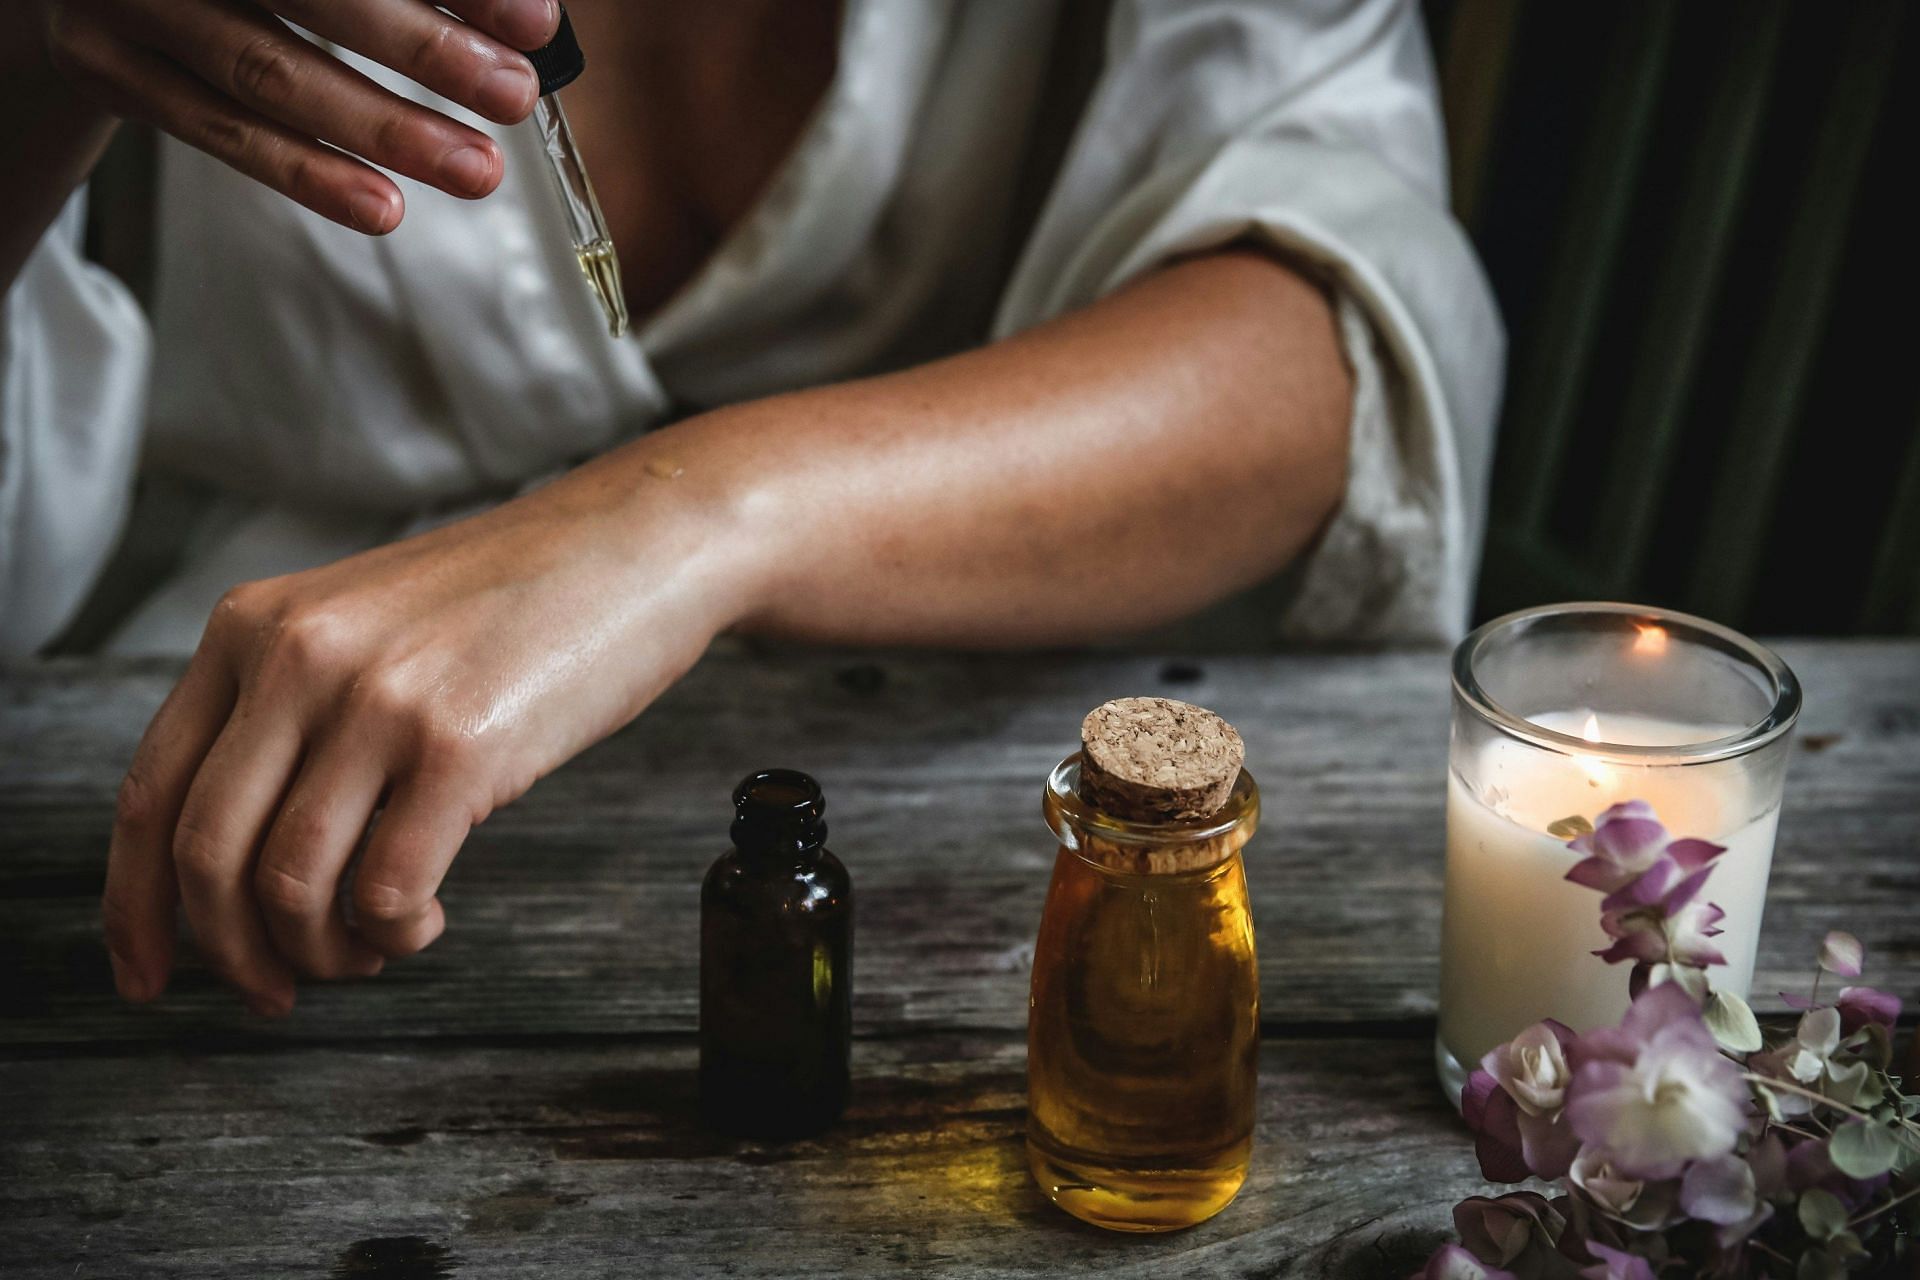 Home remedies for burns: Apply neem oil on the affected area (Image by Chelsea Shapouri/Unsplash)